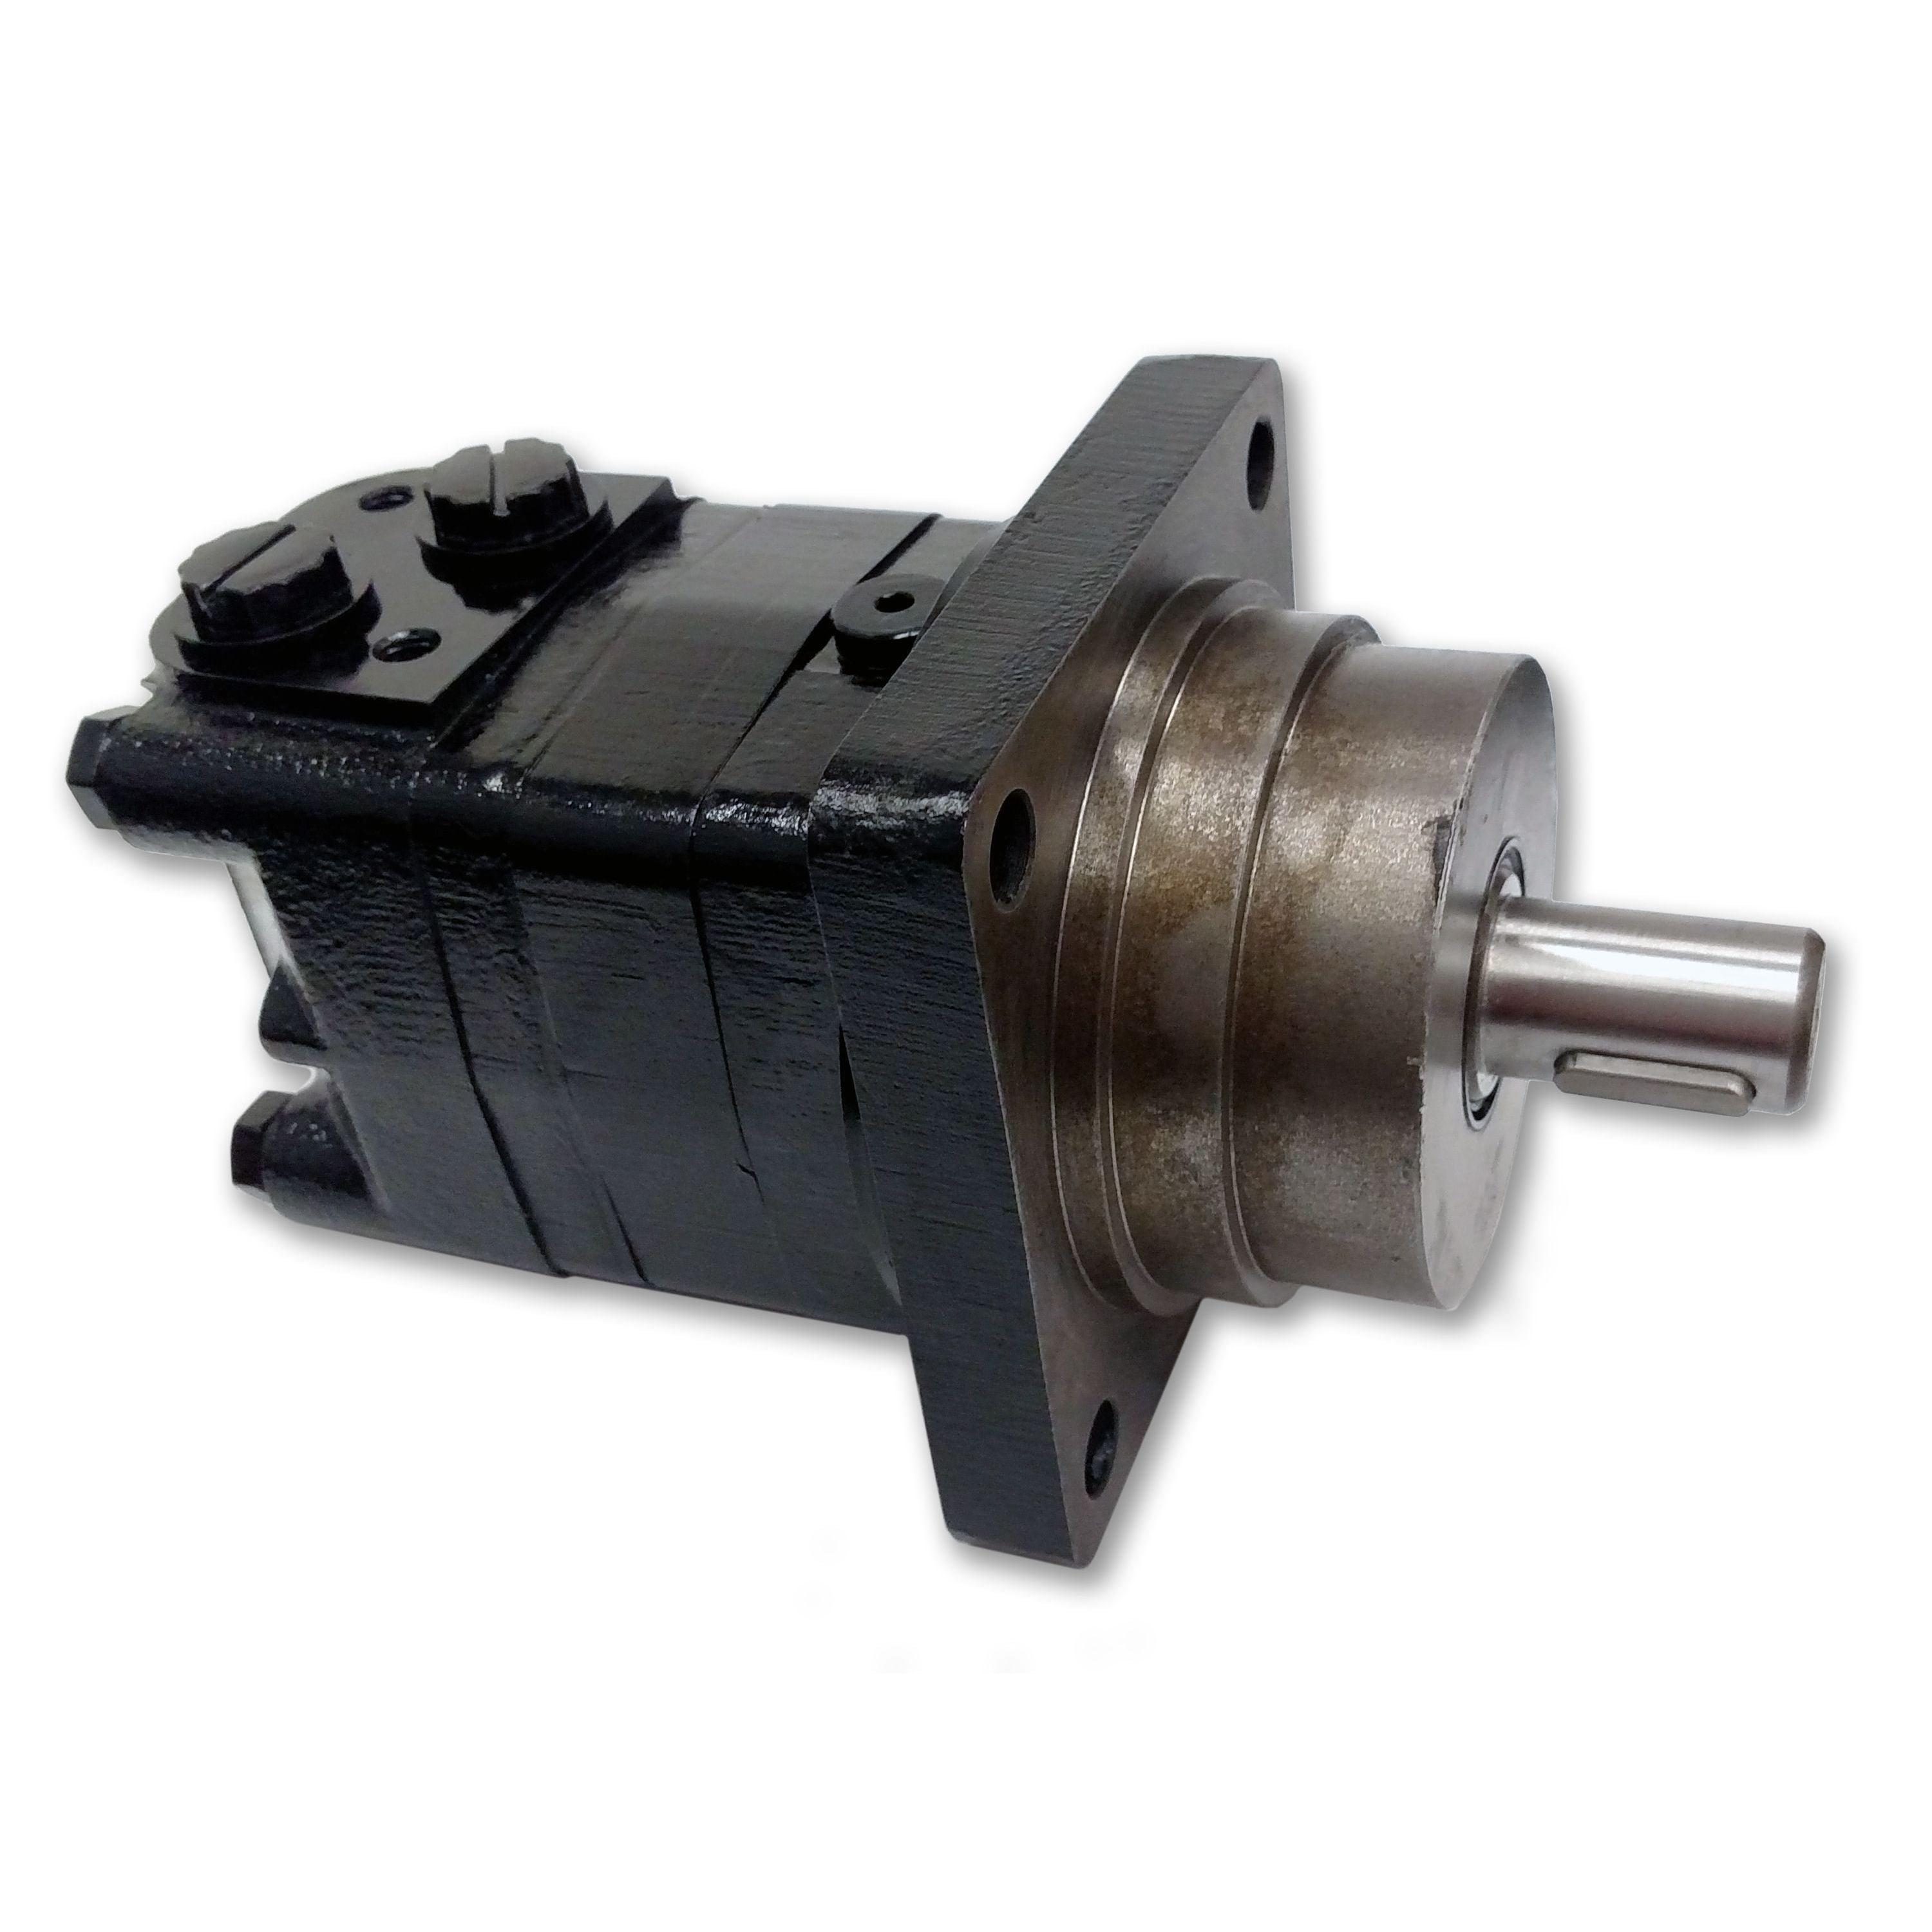 BMSY-475-WE-D-S : Dynamic LSHT Motor, 475cc, 155RPM, 8053in-lb, 2030psi Differential, 19.81GPM, Wheel Mount, 1" Bore x 1/4" Key Shaft, Side Ported, #10 SAE (5/8")